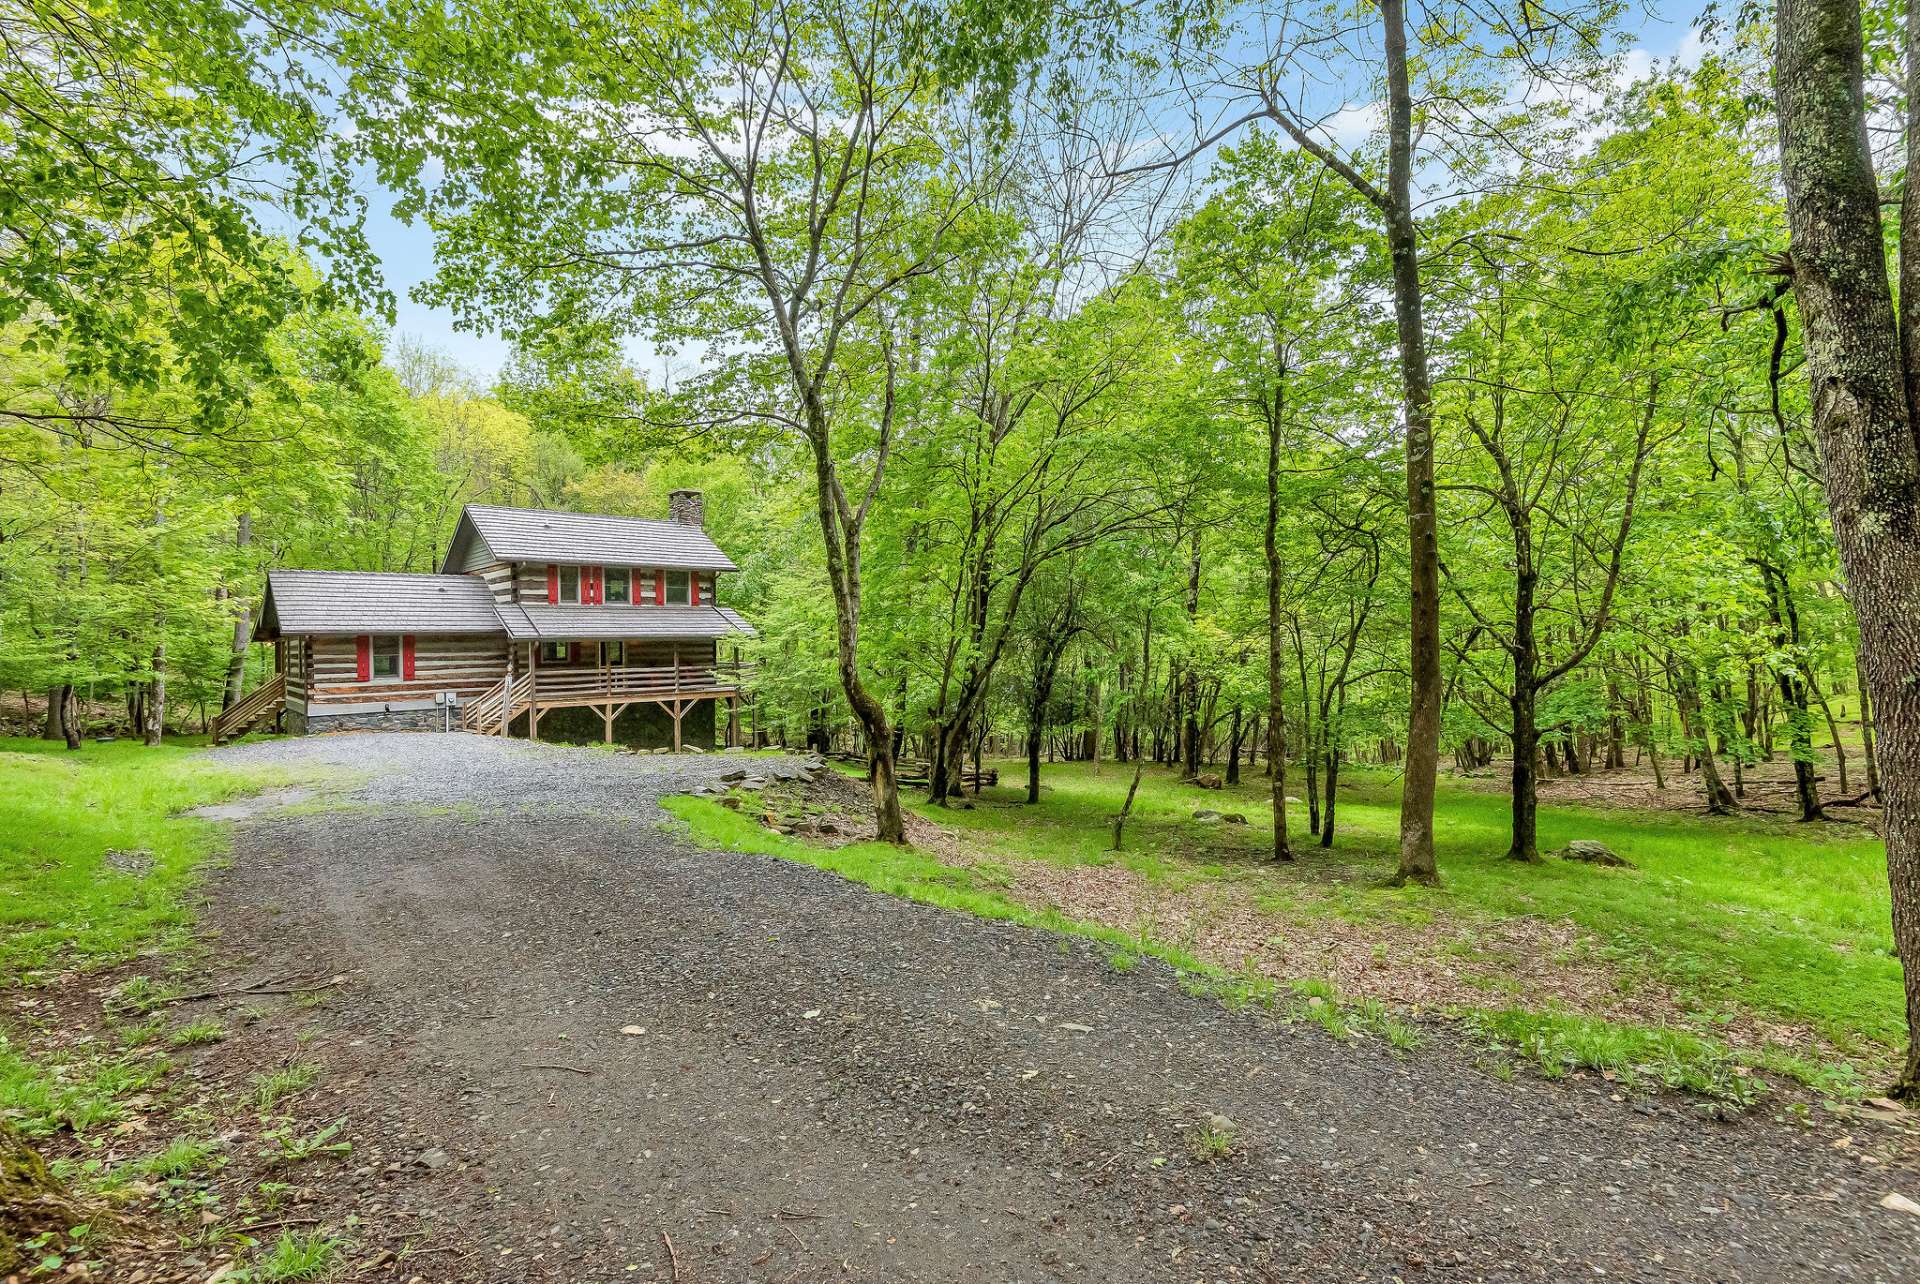 A private driveway leads down to this picturesque setting offering residents and visitors a unique opportunity to experience the serenity of forested landscapes and the warmth of traditional log home living.